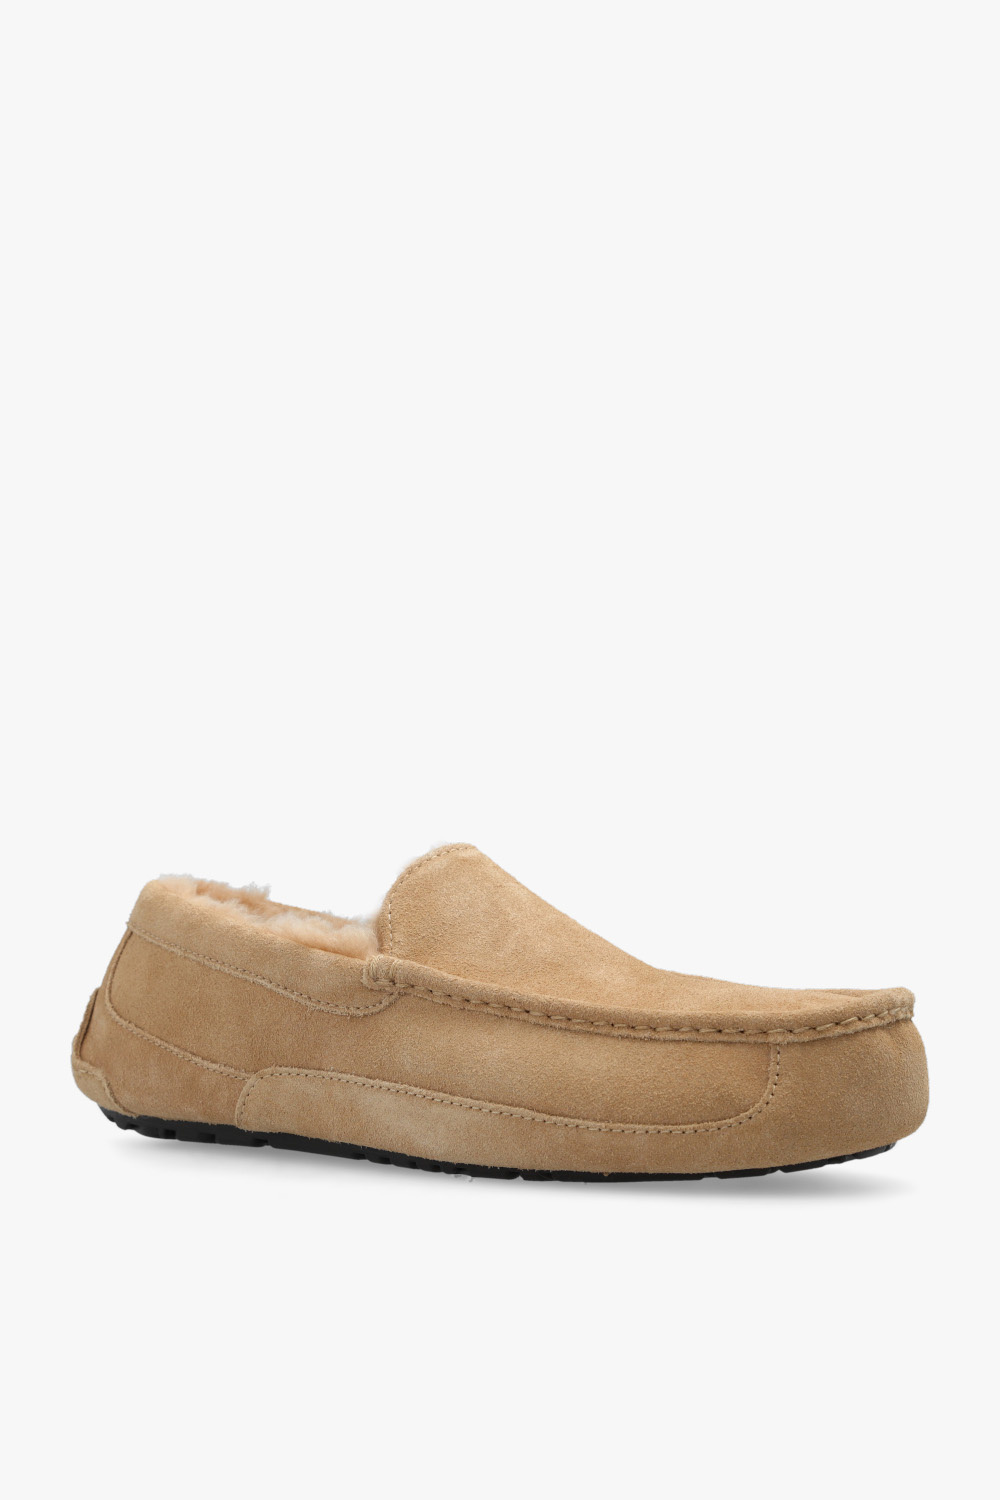 ugg Boot ‘Ascot’ suede moccasins